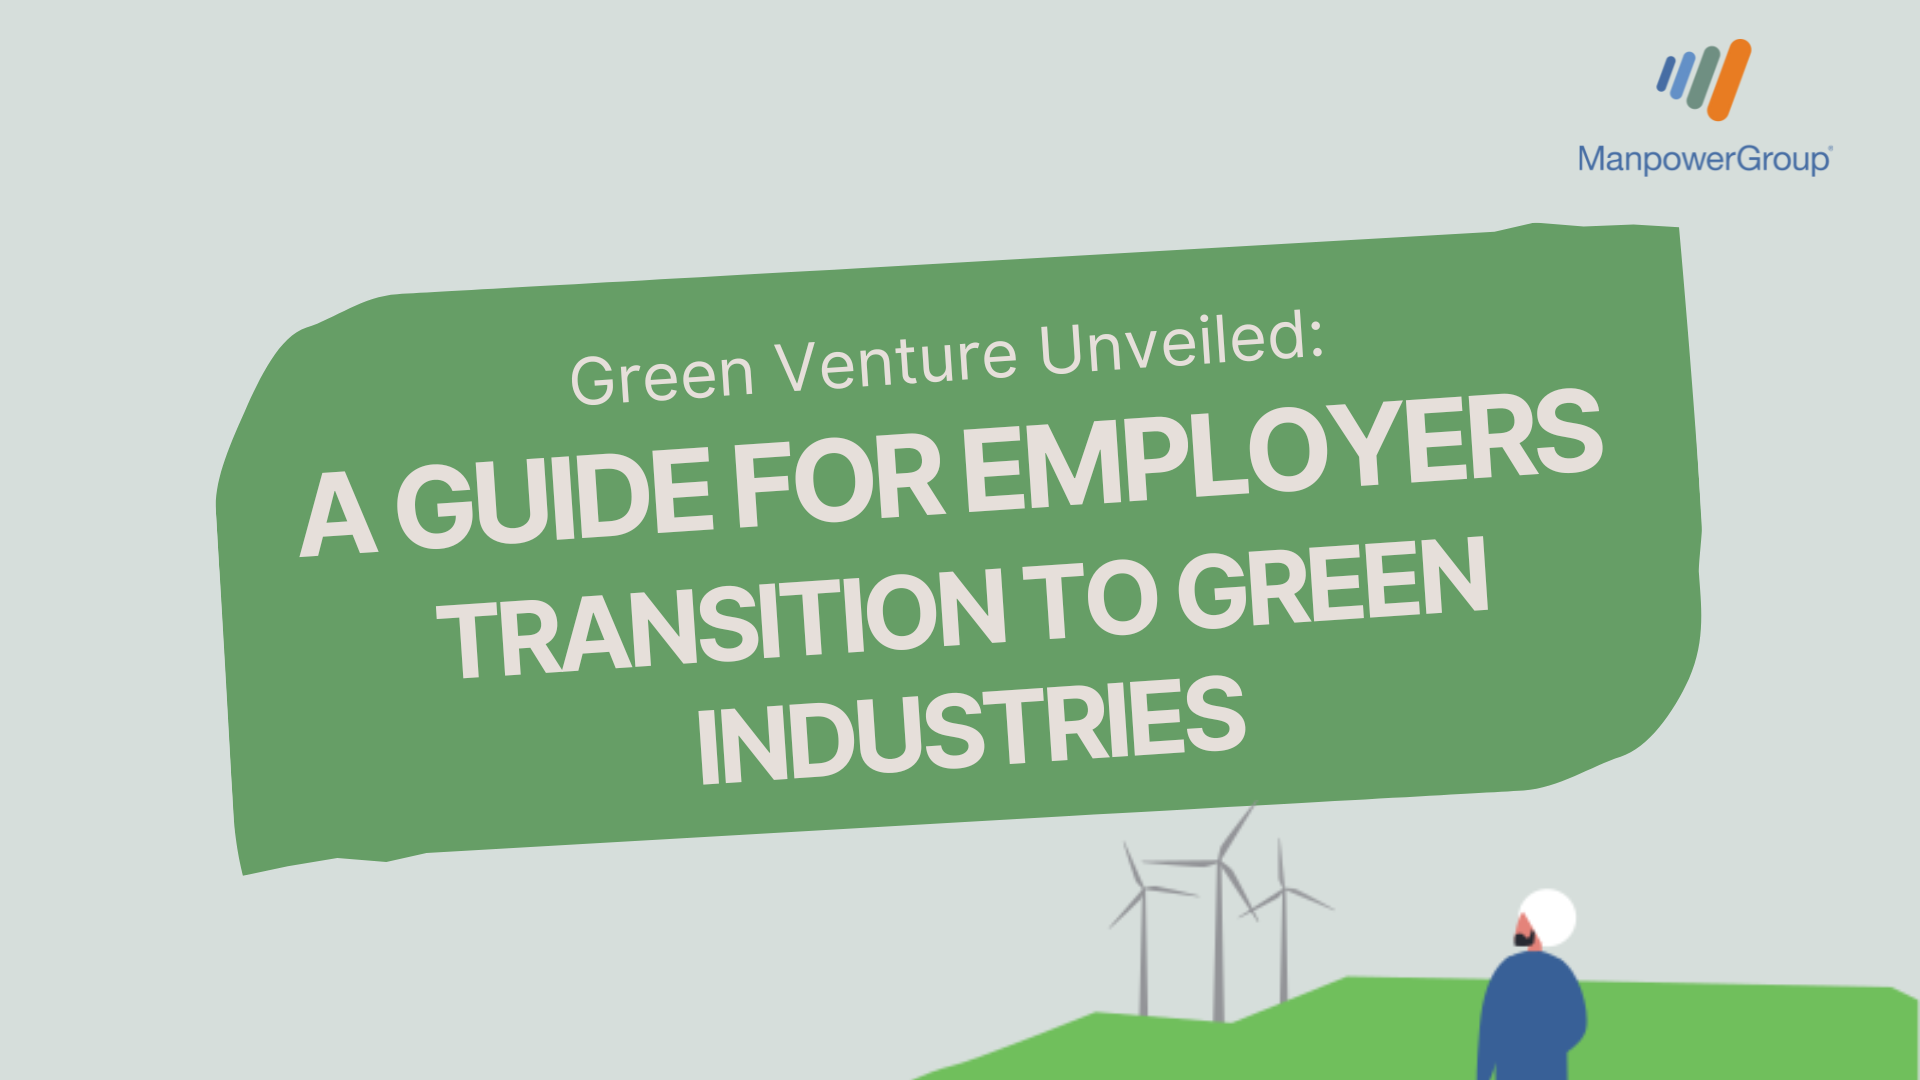 Green Venture Unveiled: A Guide for Employer Transition to Green Industries